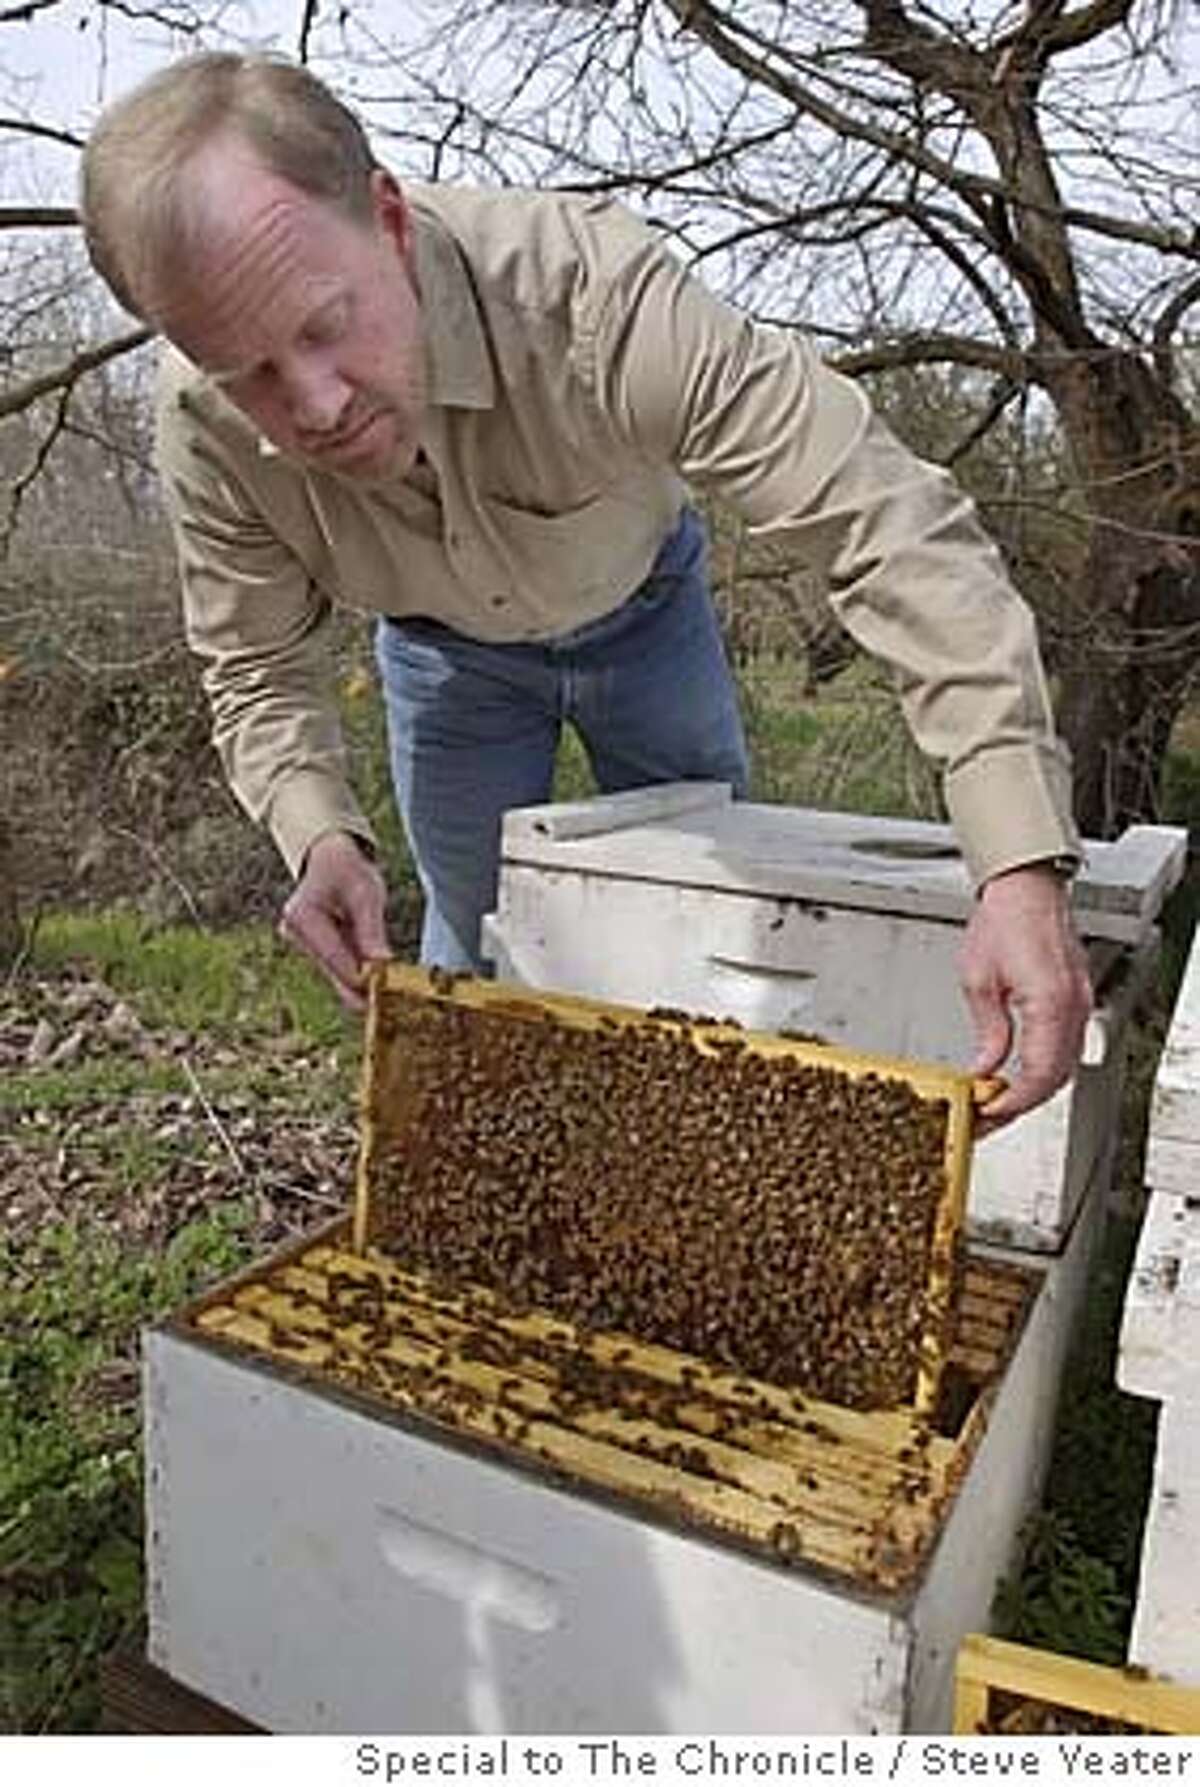 Dan Cummings talks about the Varroa destructor mite and the problems they cause with his honey bee population as he examines a hive in an almond field near his home in Chico, Calif., on Thursday, March 3, 2005. Photo by Steve Yeater/Special to The Chronicle